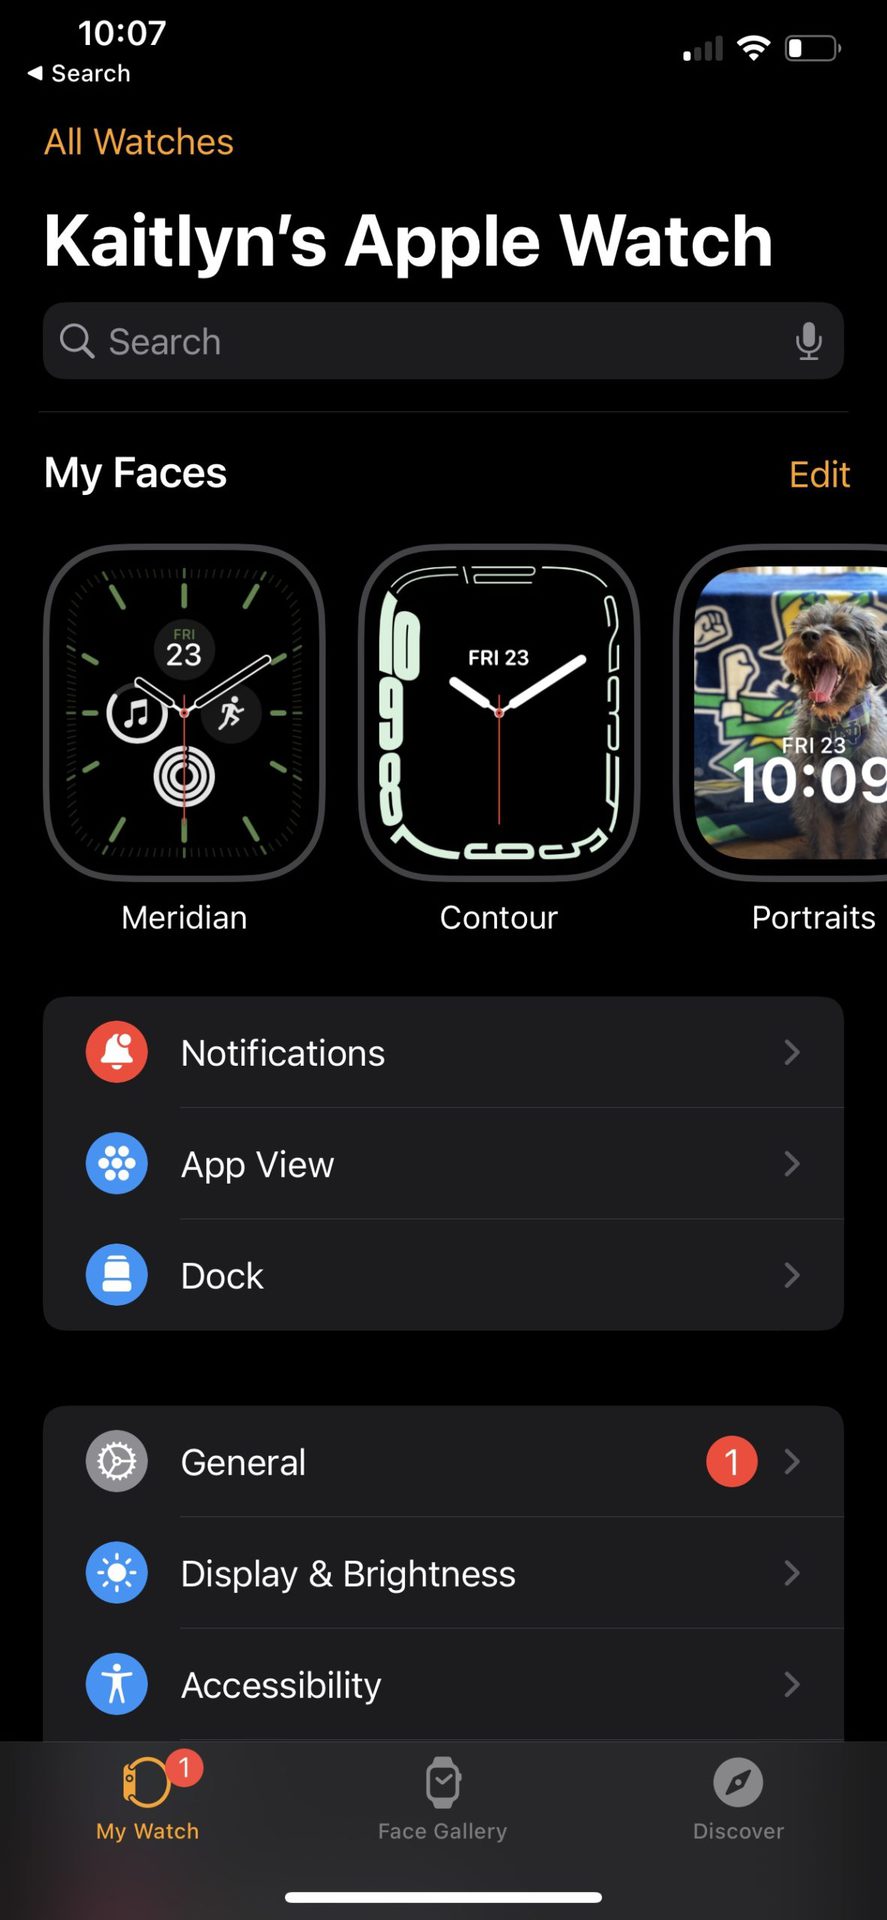 An iPhone 11 screenshot depicts the My Watch tab in the Watch app